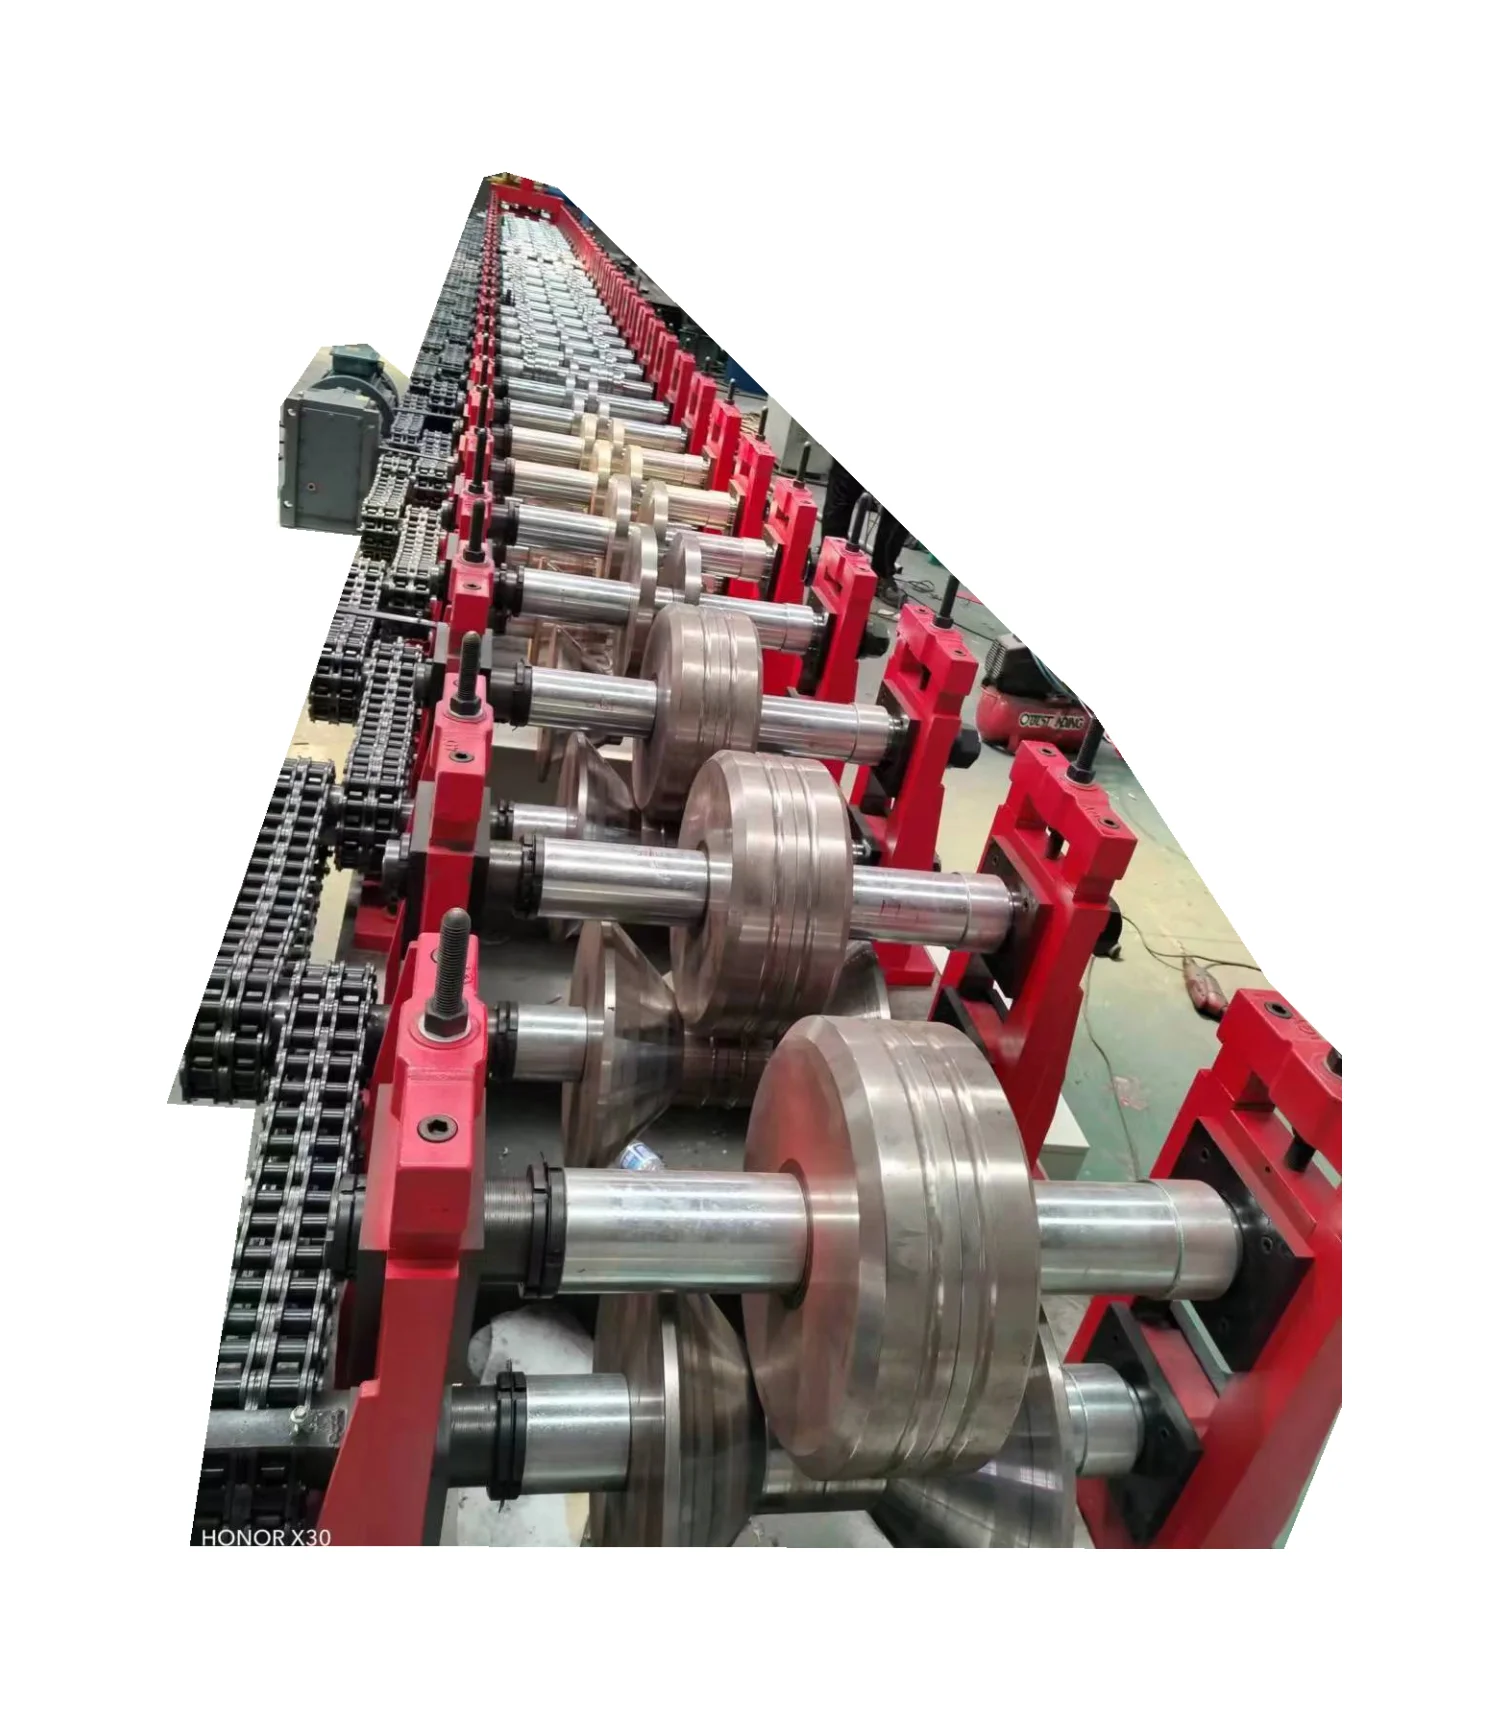 Gutter Cold Roll Forming Machine